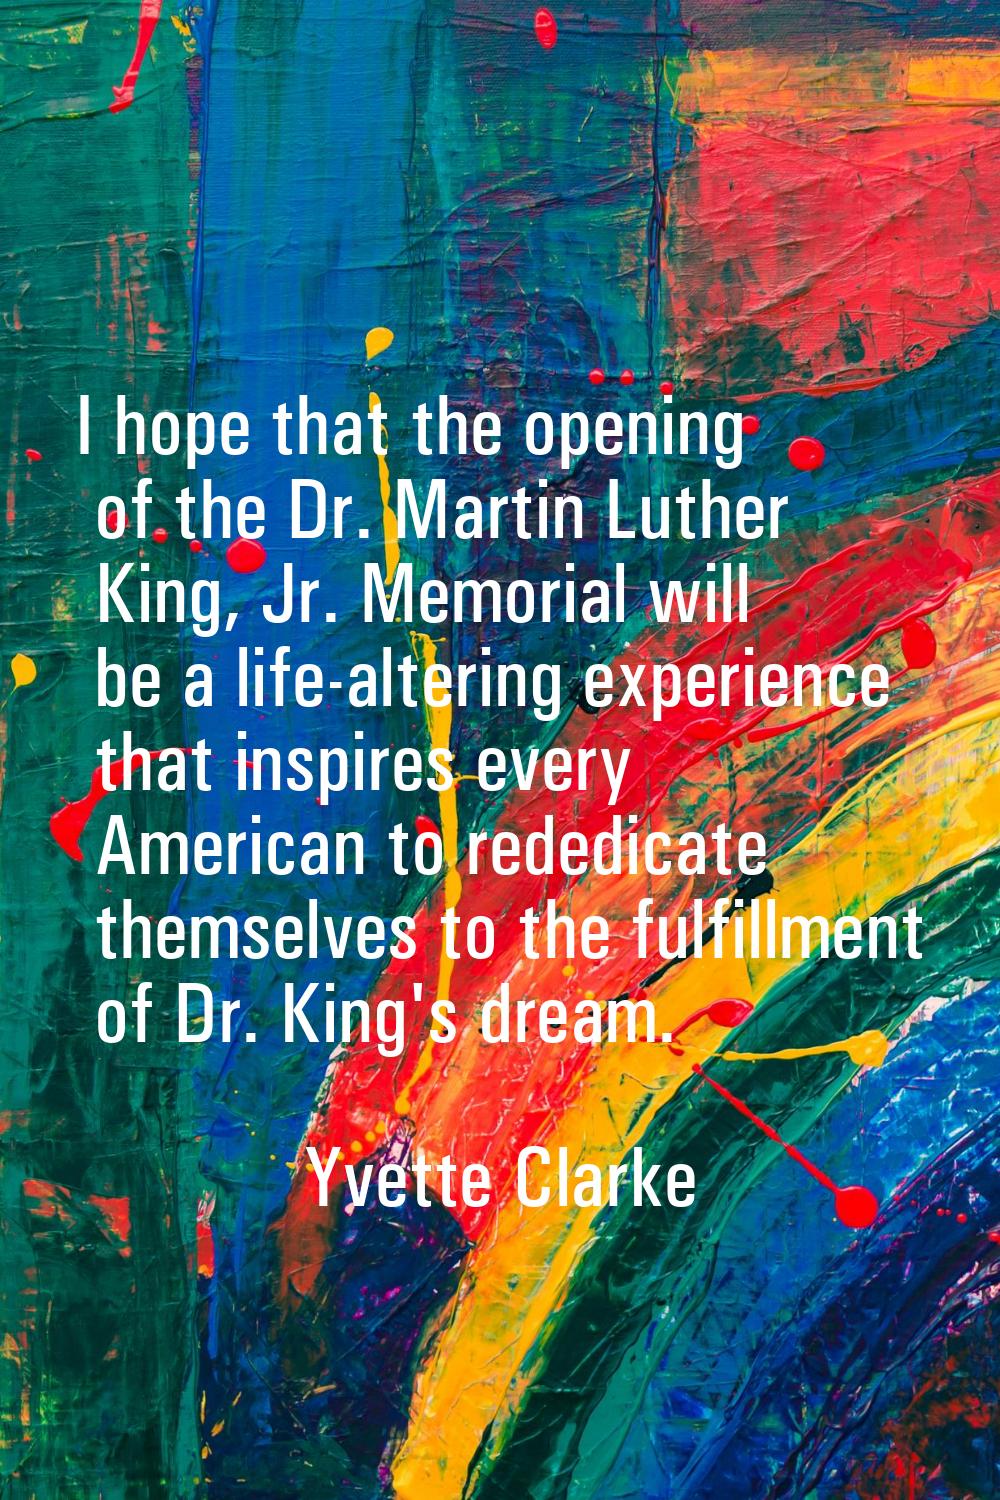 I hope that the opening of the Dr. Martin Luther King, Jr. Memorial will be a life-altering experie